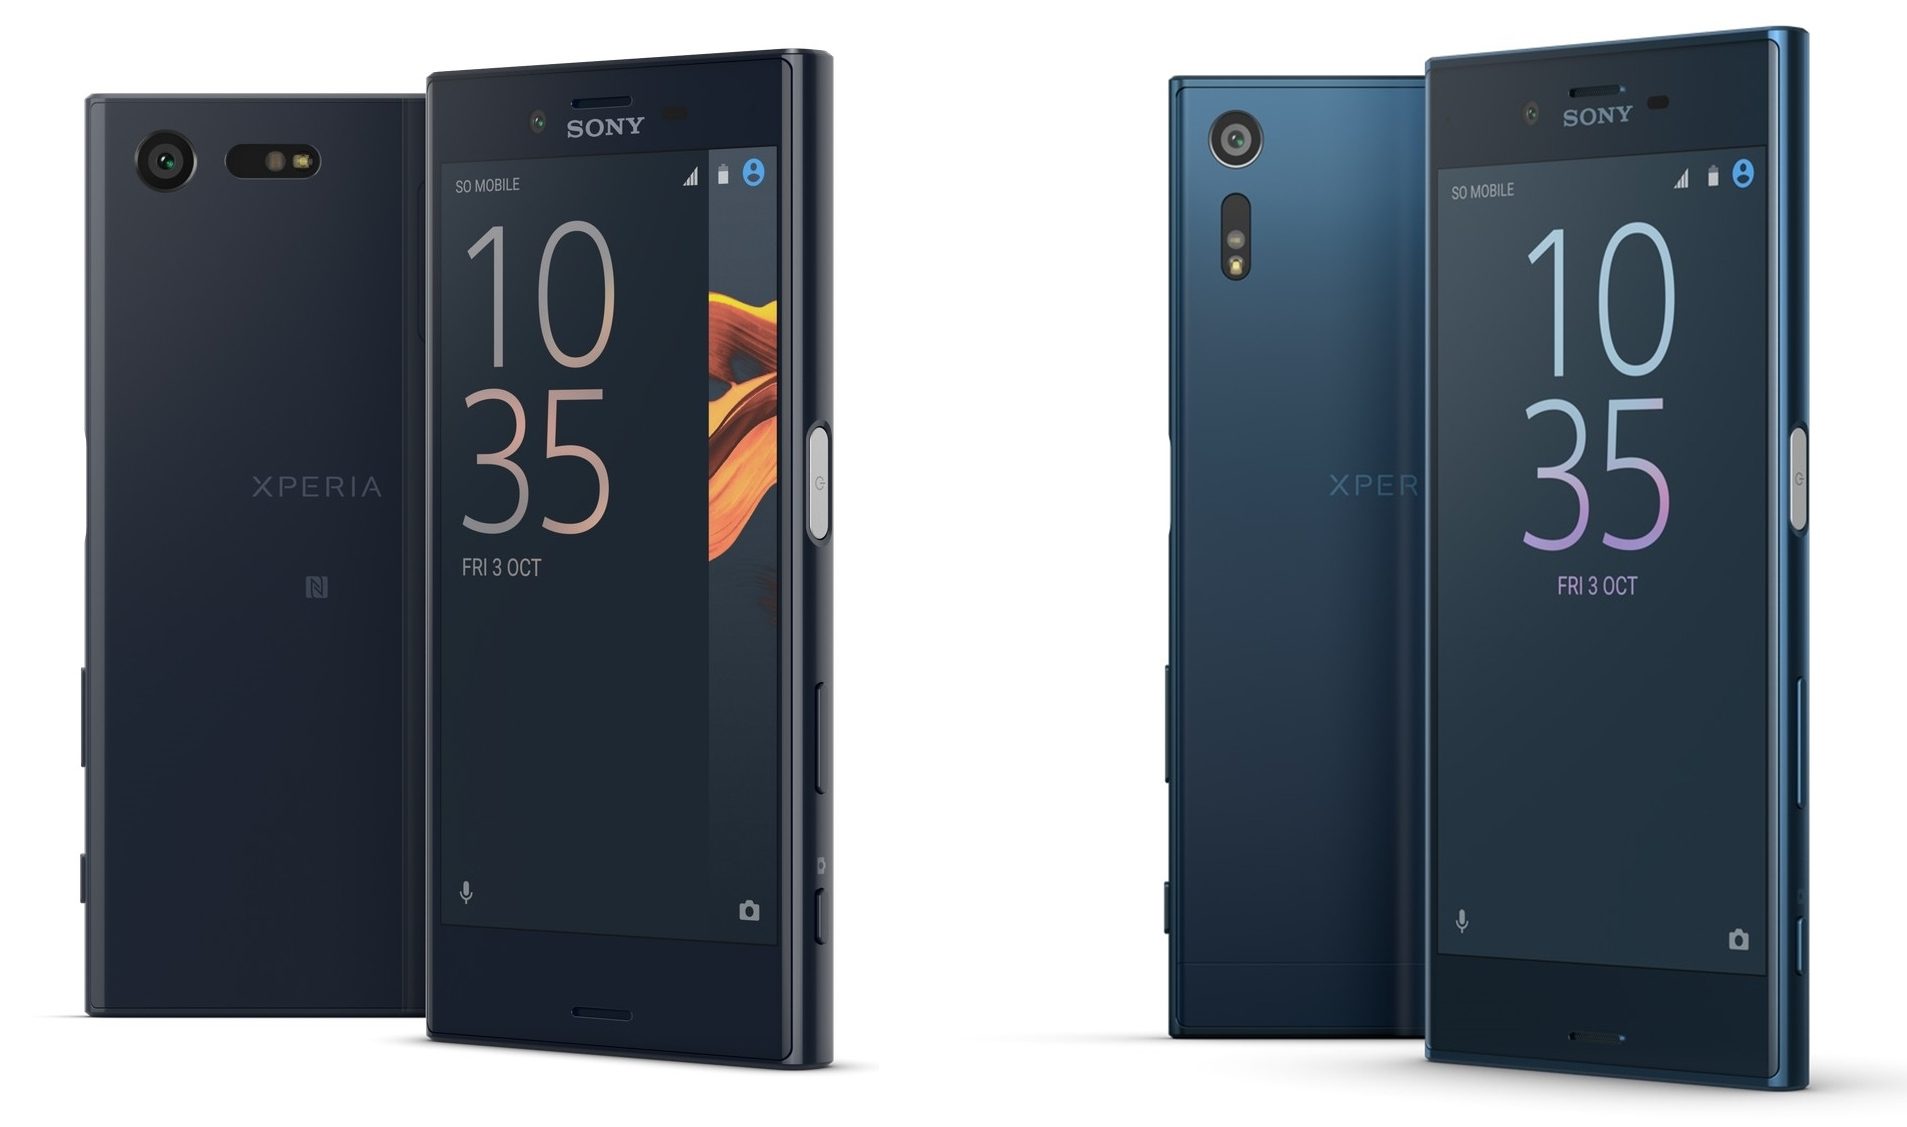 Sony Launches Xperia X Compact and Xperia XZ Smartphones at IFA 2016